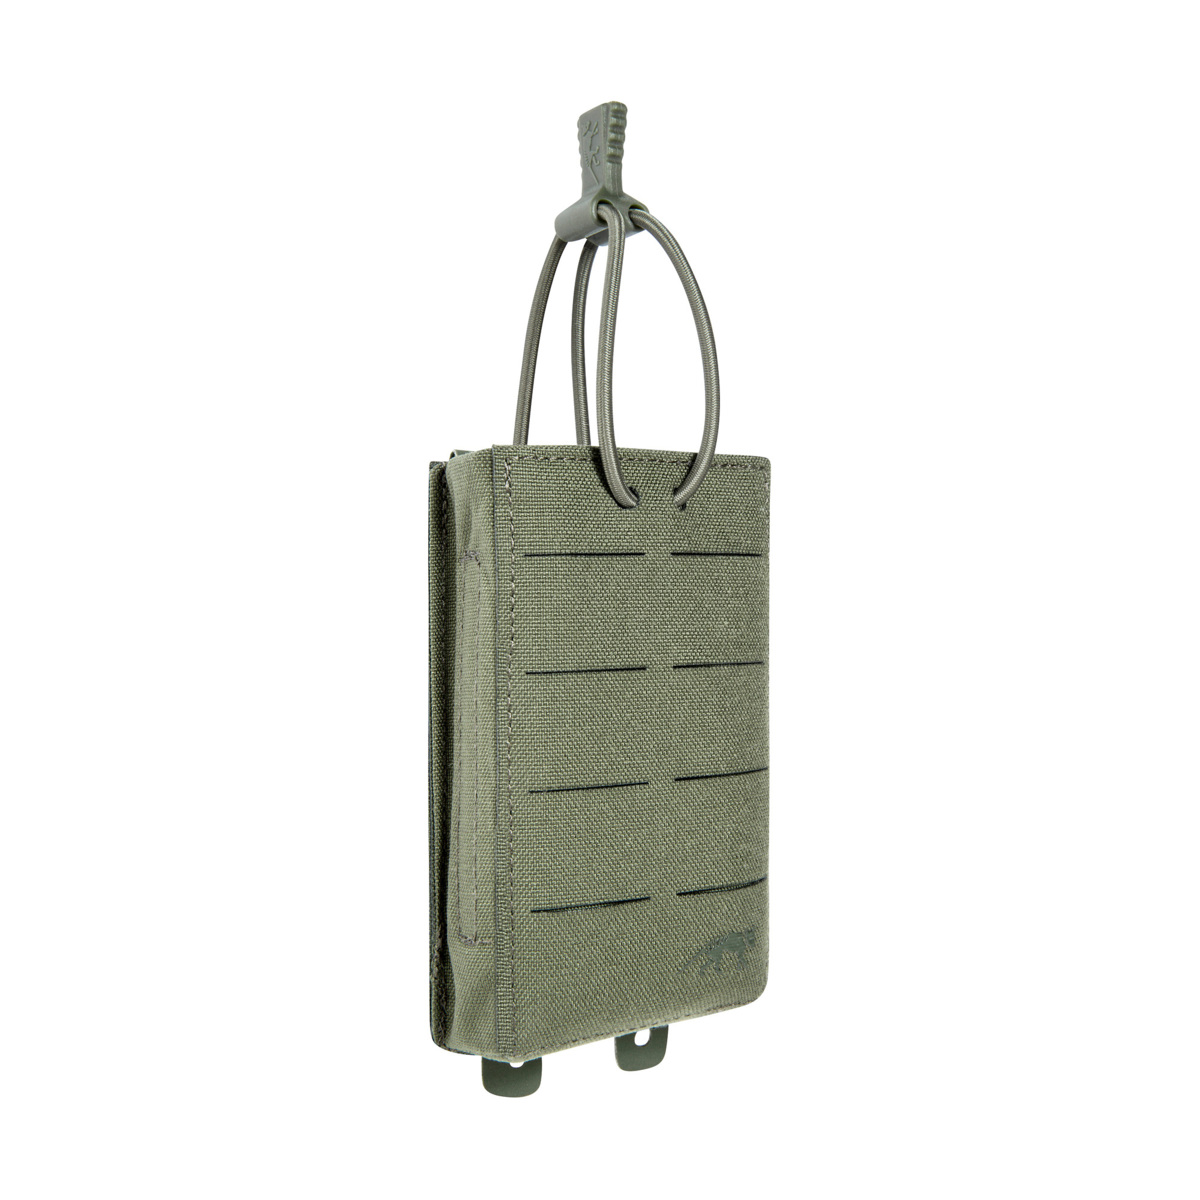 TT SGL Mag Pouch BEL M4 MKIII Olive